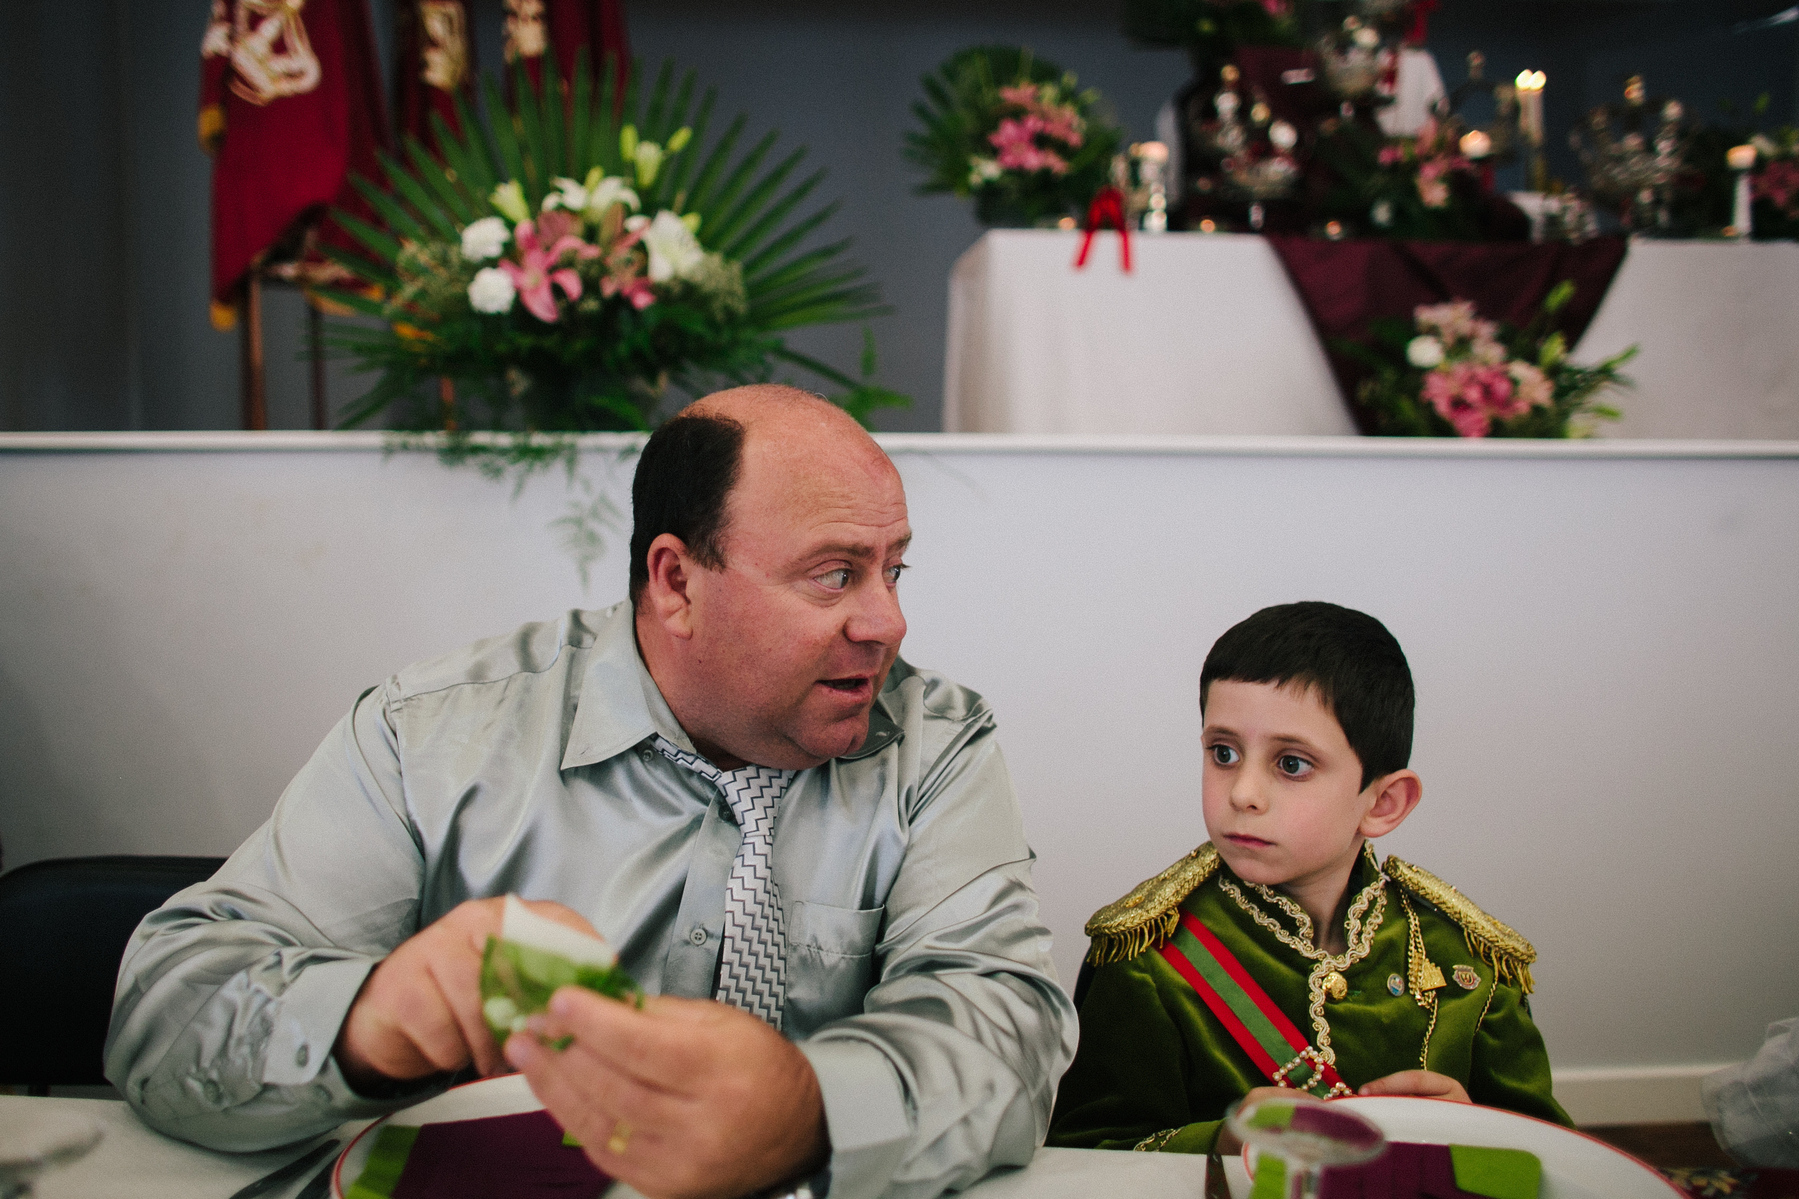 A boy sits next to a man at a lunch table. The boy is wearing a sort of pretend uniform, in green, and looks very serious. 